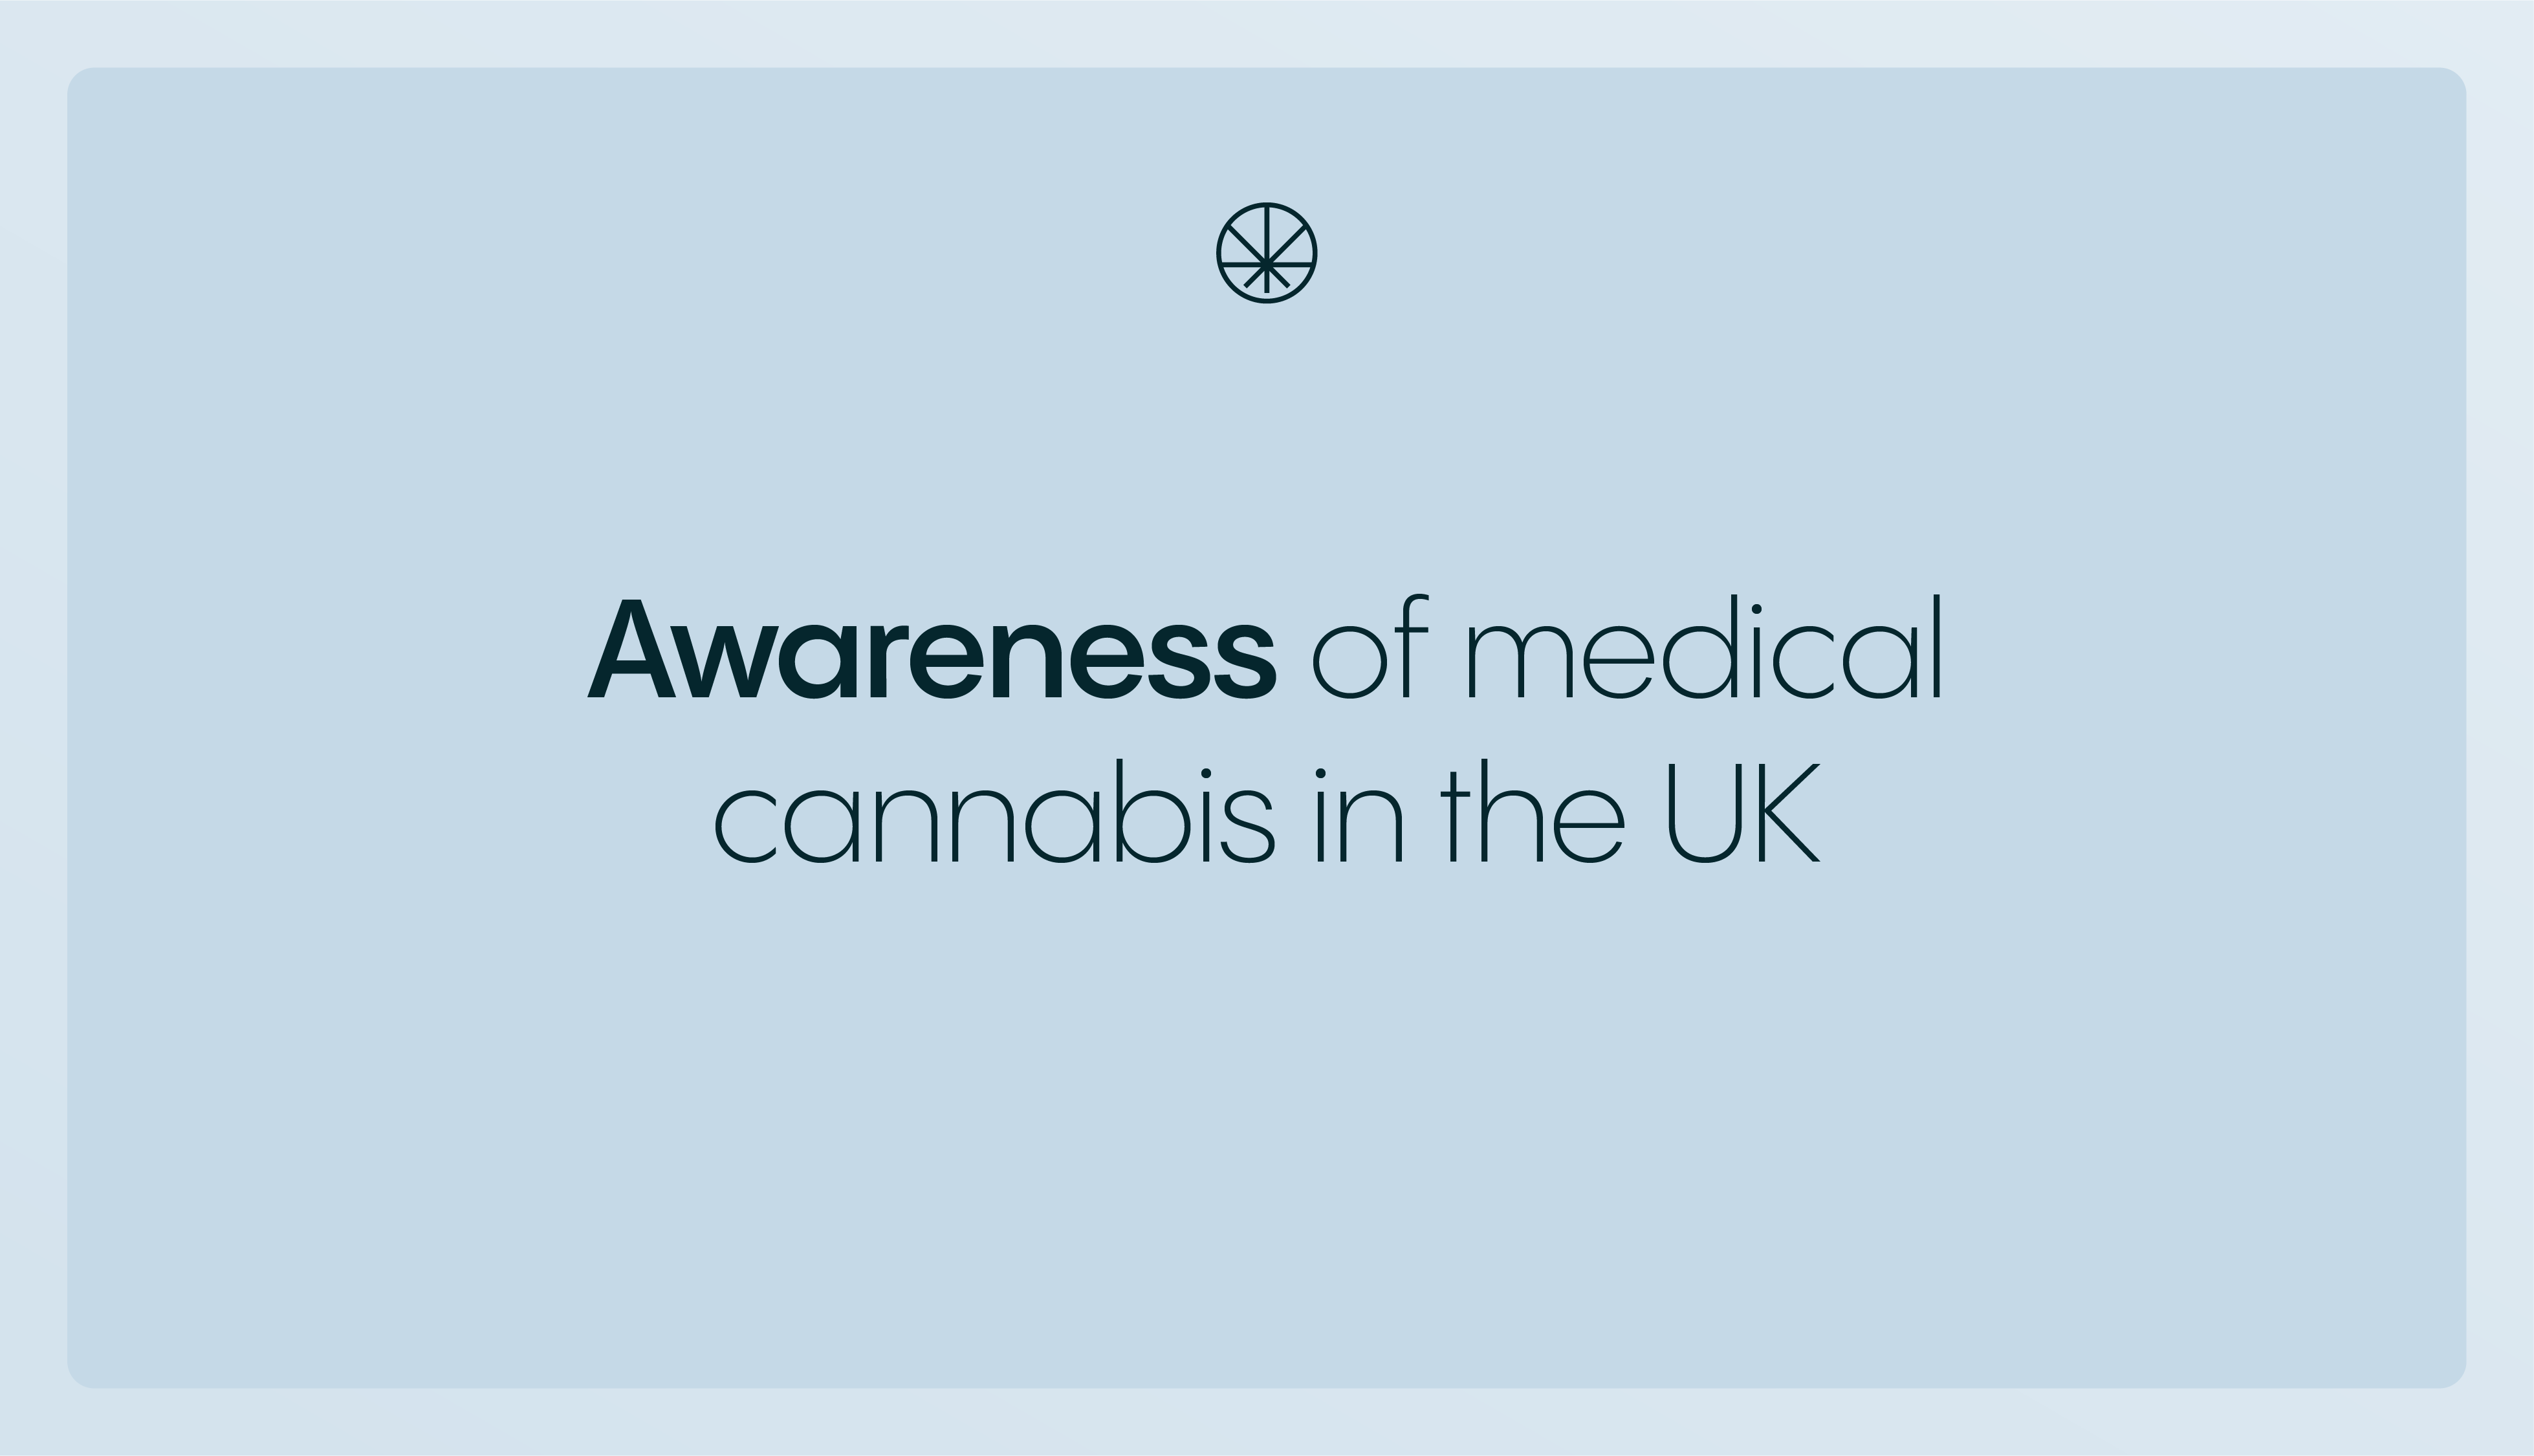 Awareness of medical cannabis in the UK